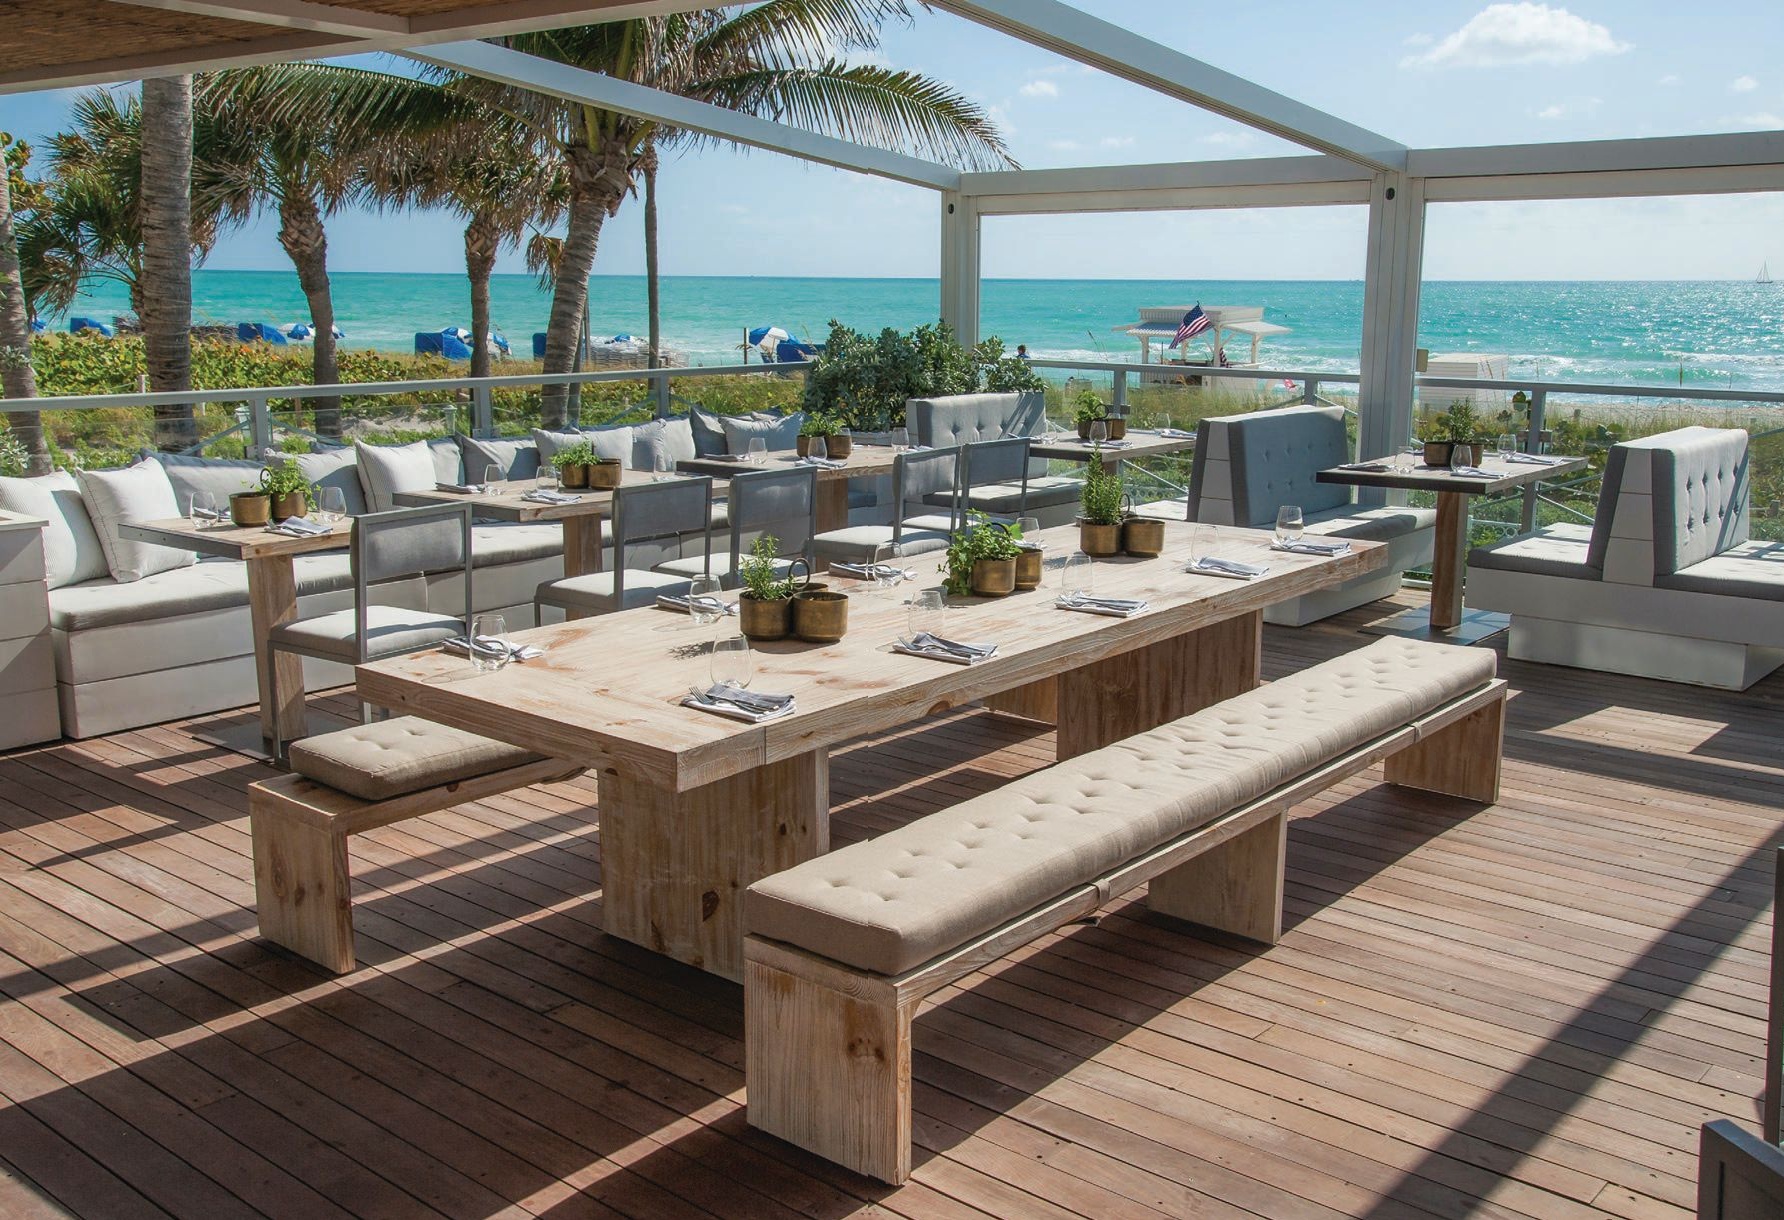 Diners can indulge in a gourmet meal with oceanfront views at its new restaurant, Ocean Social. PHOTO COURTESY OF EDEN ROC AND NOBU HOTEL MIAMI BEACH